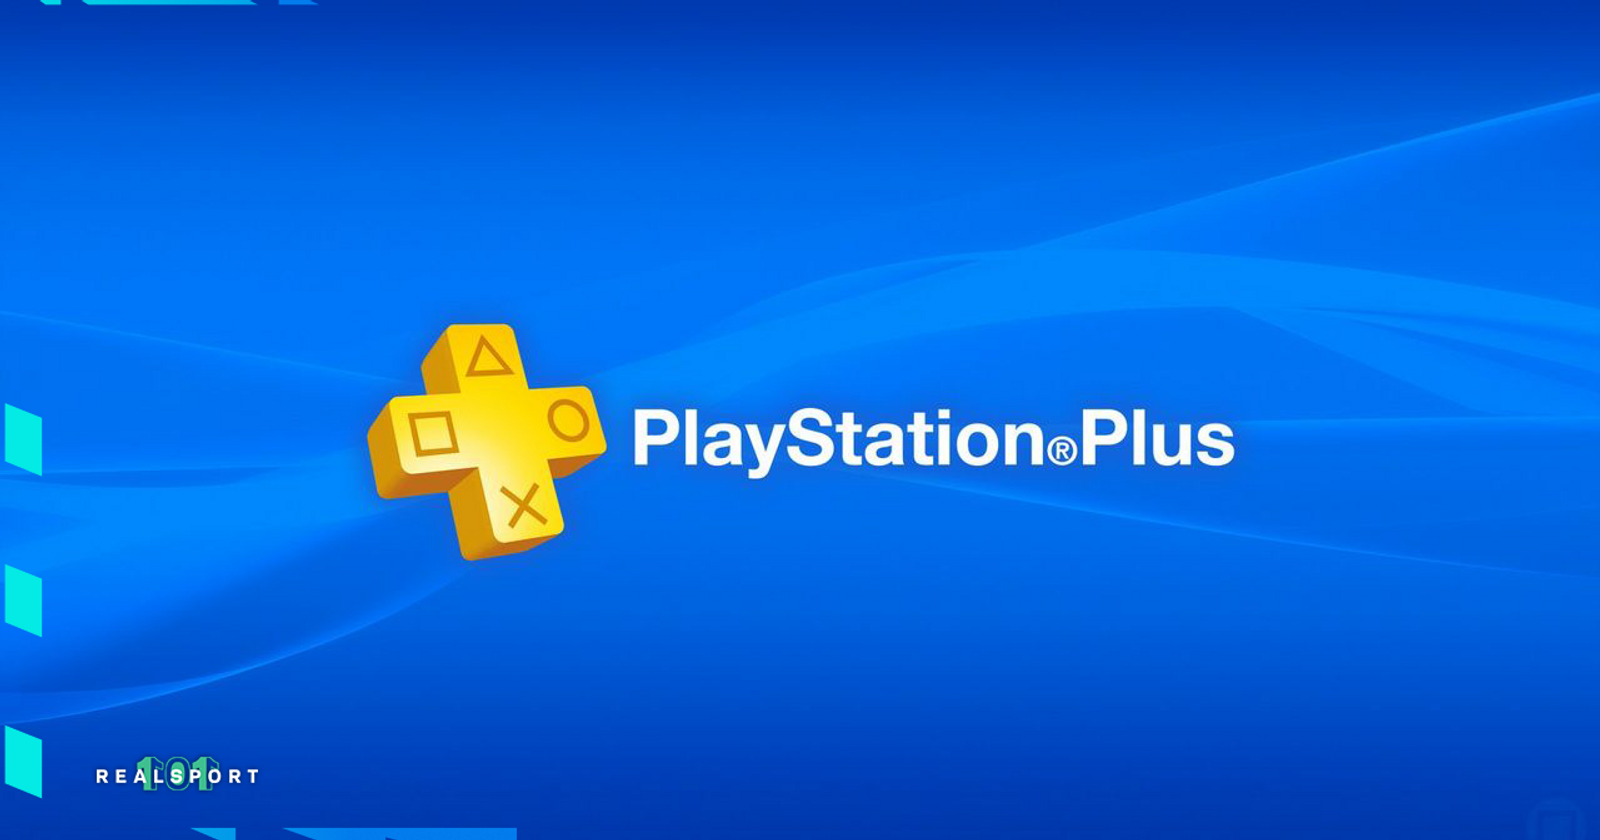 PlayStation Plus games for February: EA Sports UFC 4, Planet Coaster:  Console Edition, Tiny Tina's Assault on Dragon Keep: A Wonderlands One-shot  Adventure – PlayStation.Blog